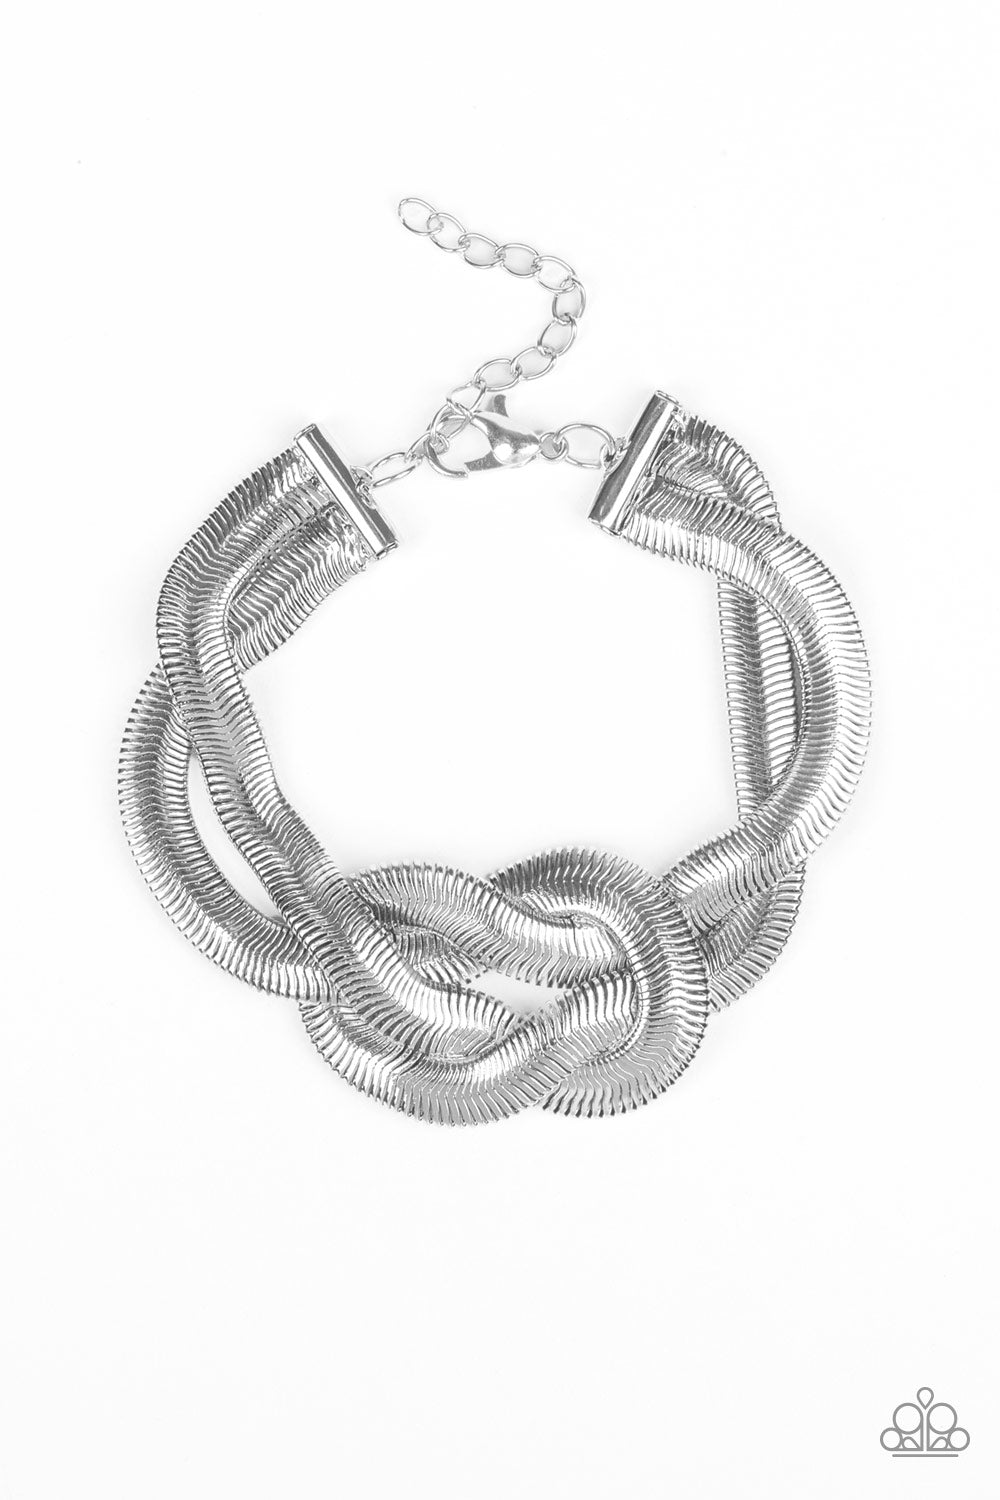 Paparazzi Accessories - To The Max - Silver Bracelet